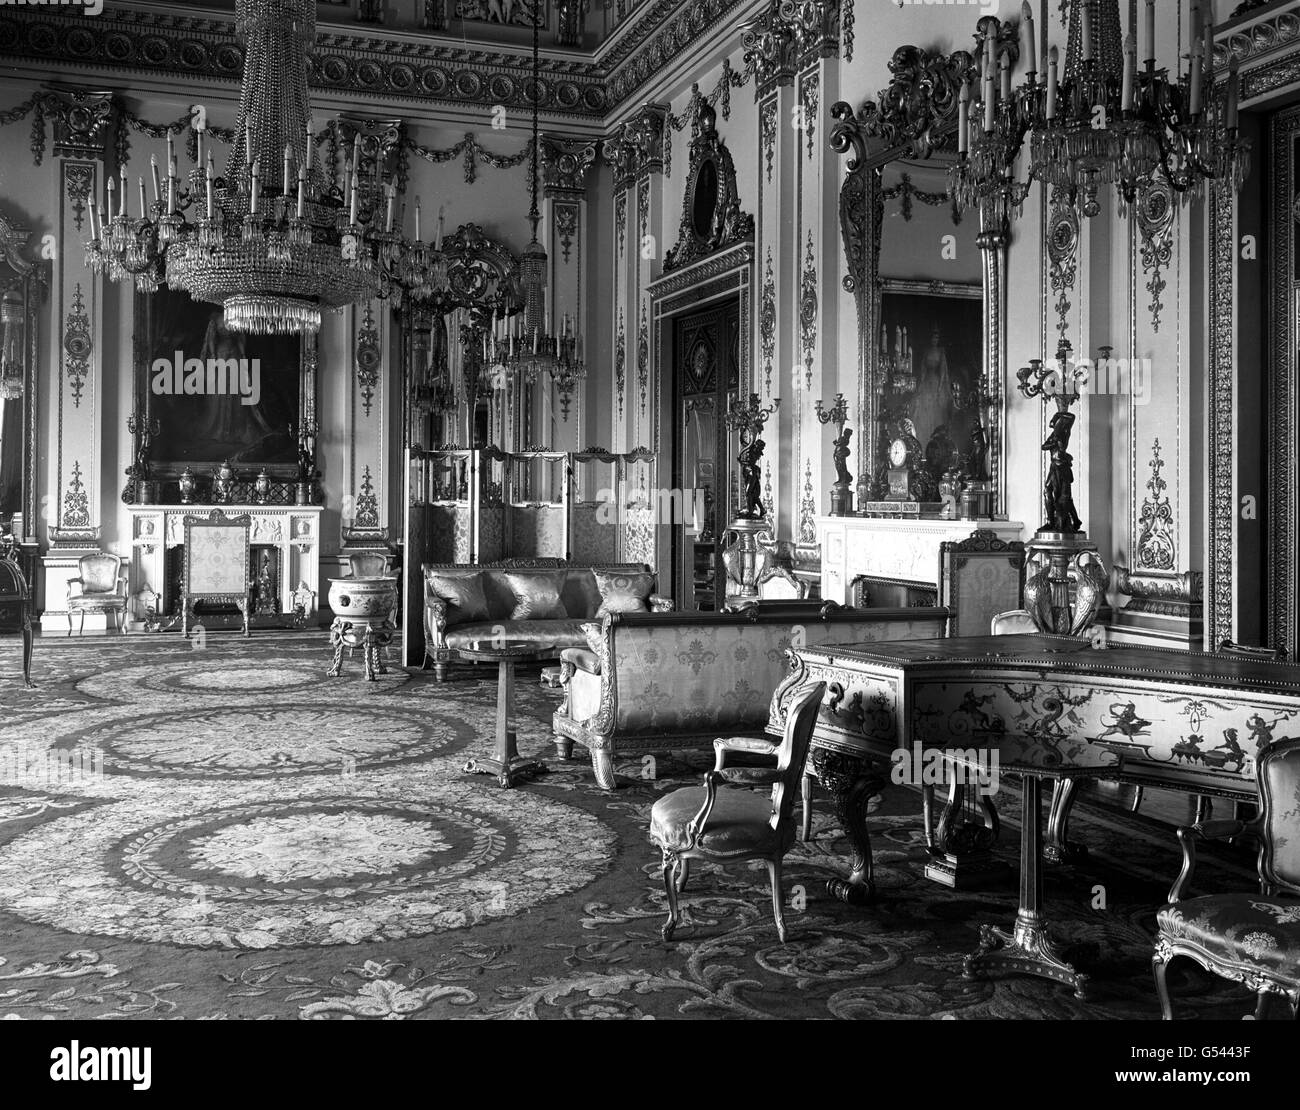 The White Drawing Room inside Buckingham Palace, showing its ornate design in white and gold. In the room can be seen some fine specimens of French and Regency furniture, handsome chandeliers, and its beautiful piano, giving a rich and satisfying appearance. Stock Photo